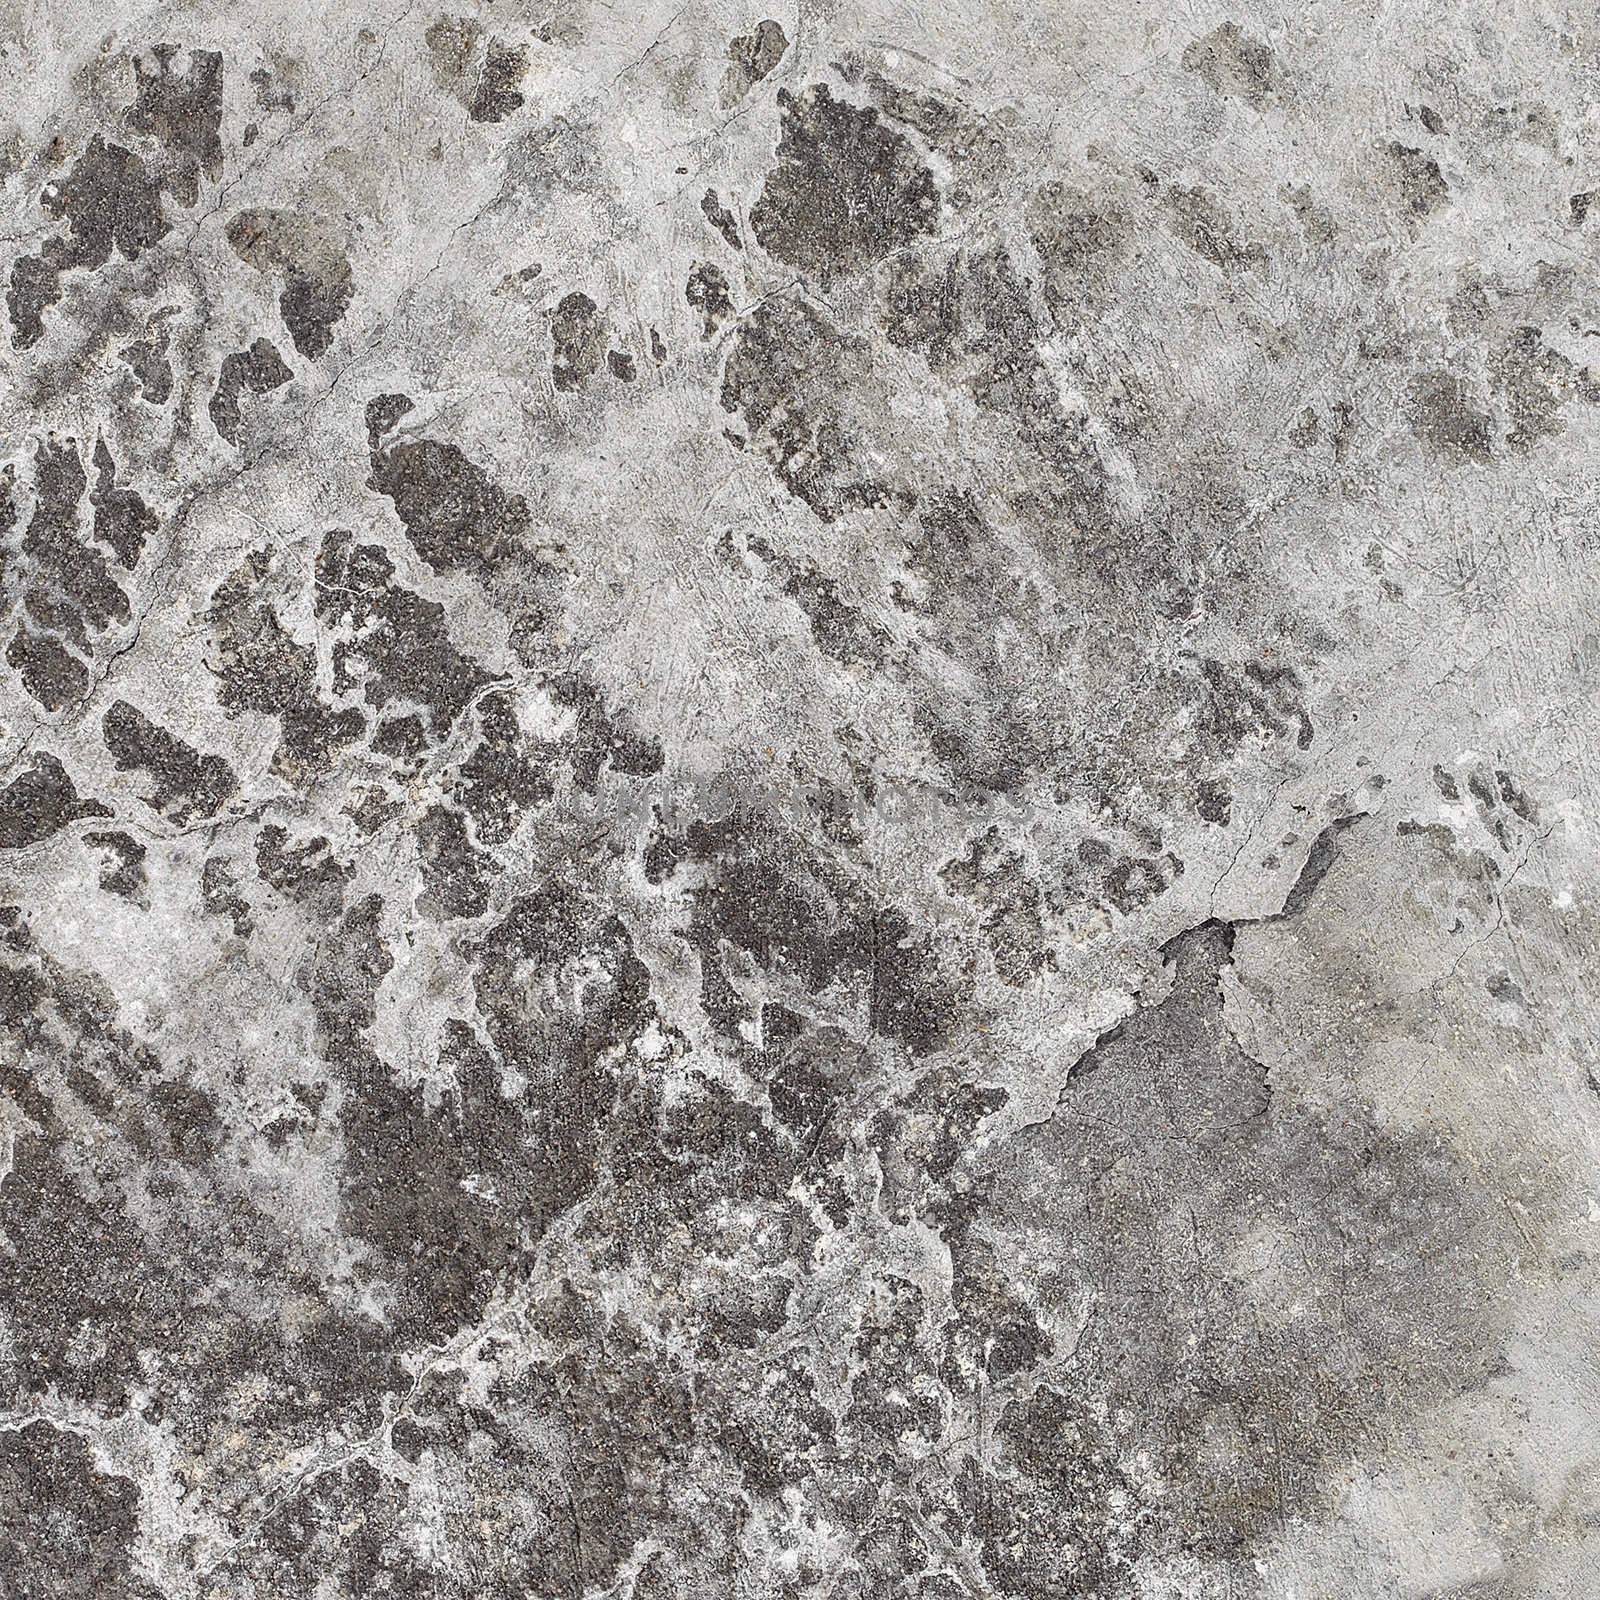 A square texture gray stone wall with spots